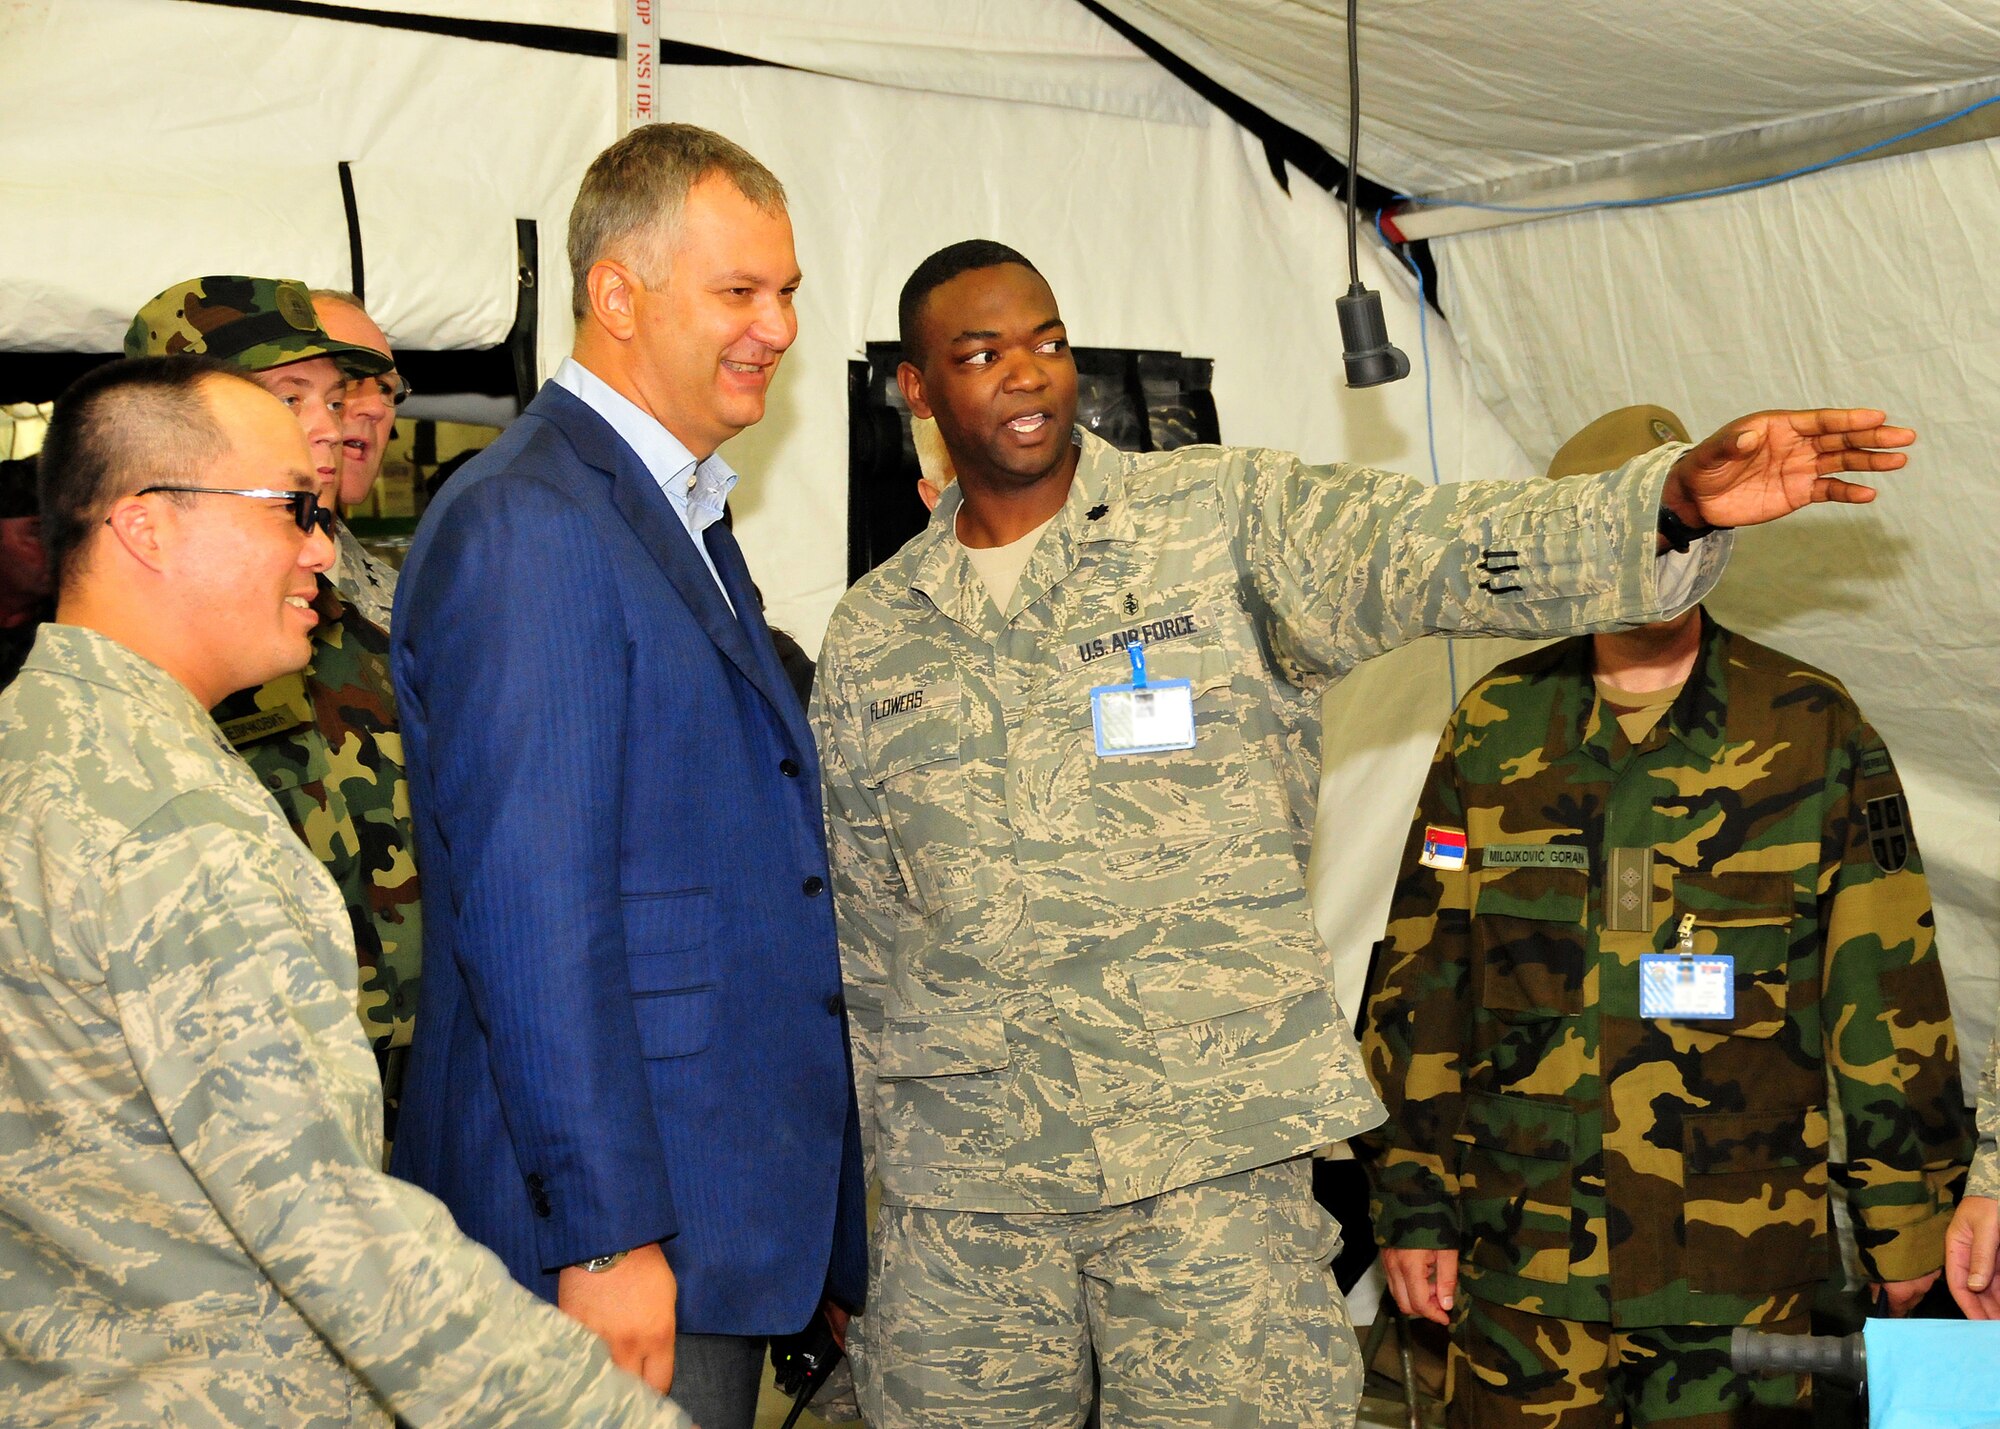 Lt. Col. Alfred K. Flowers Jr., 86th Medical Support Squadron commander, shows Dragan Sutanovac, Republic of Serbia minister of defense, the 458th Expeditionary Medical Squadron's mobile tent hospital as part of the MEDCEUR 09 distinguished visitors' day in Nis, Serbia, Sept. 10, 2009.  MEDCEUR is an annual joint and combined medical exercise with a focus on major disaster response and mass casualty situations.  More than 700 exercise participants from 15 countries are taking part in this year’s exercise, which is hosted by Serbia. (U.S. Air Force photo by Staff Sgt. Markus M. Maier)